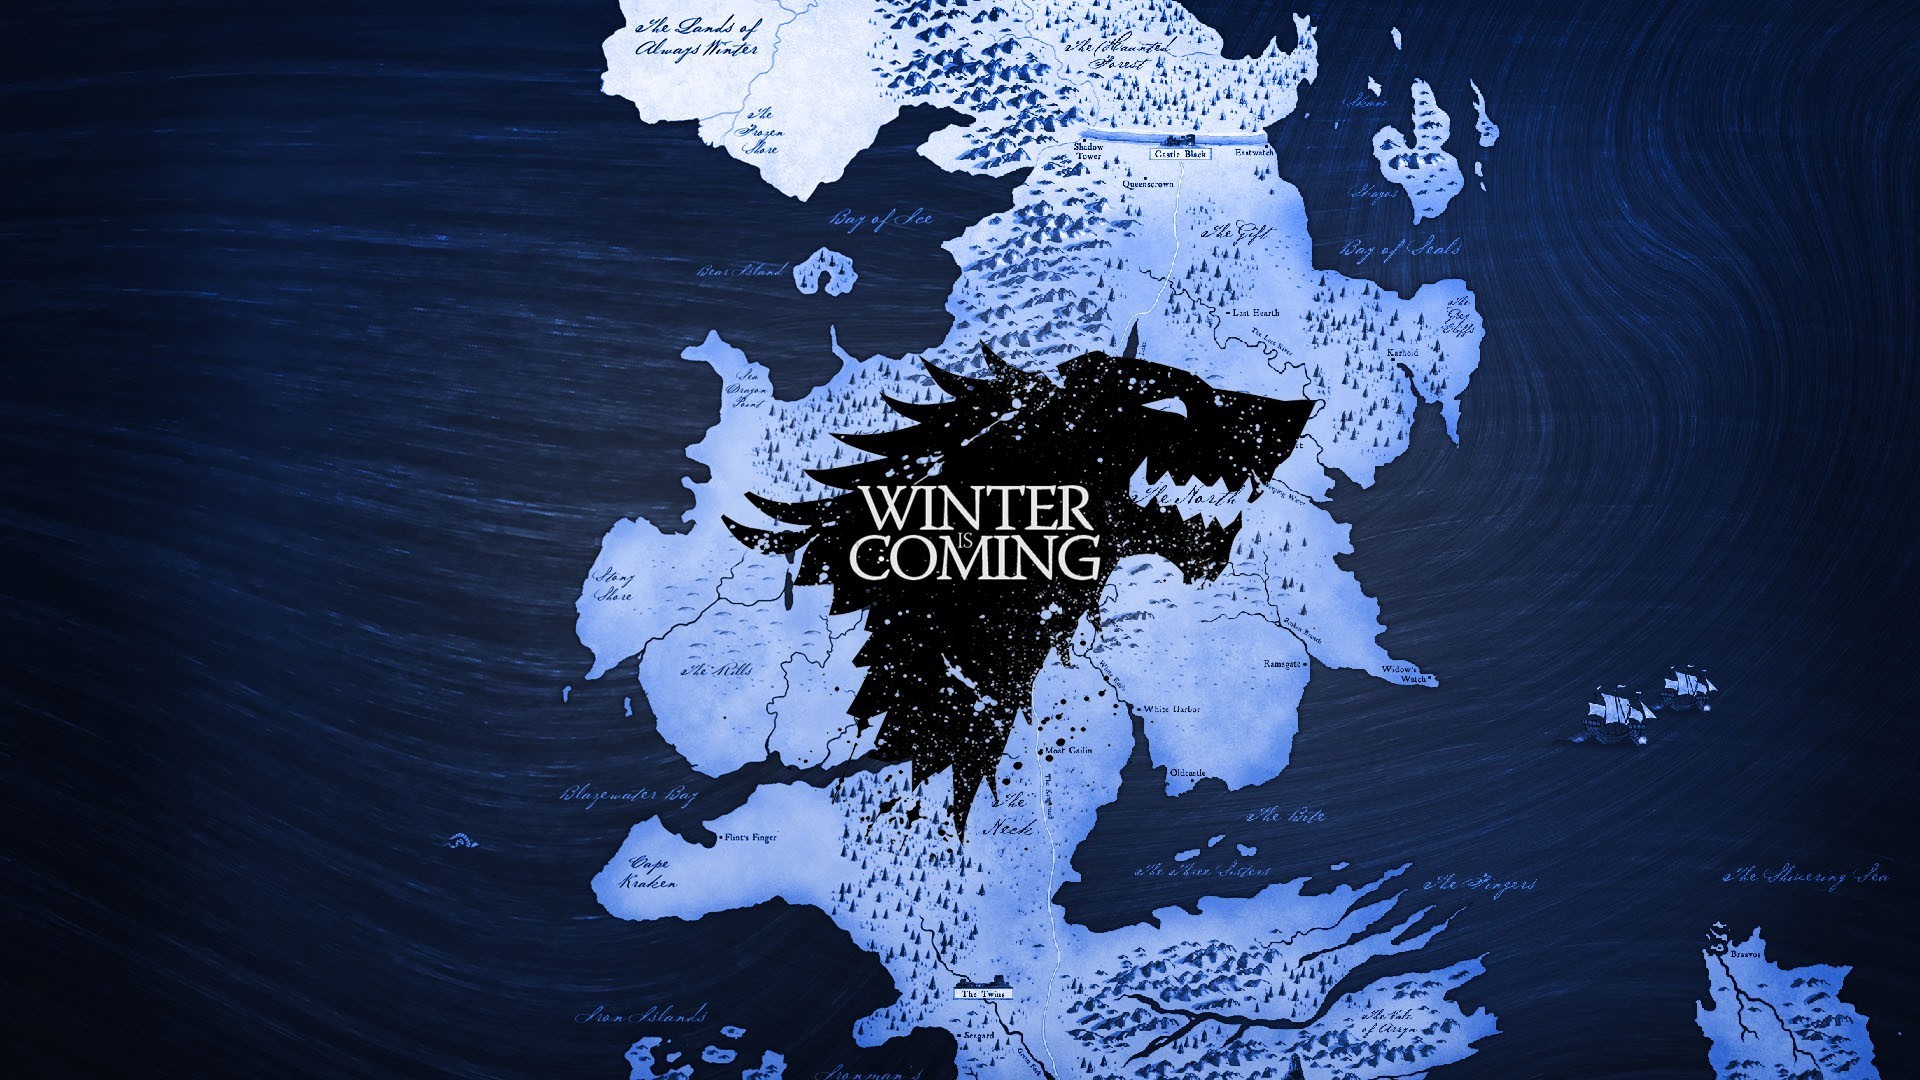 Game of thrones map westeros winterfell a song of ice and fire house stark winter is ing wolf wallpapers hd desktop and mobile backgrounds